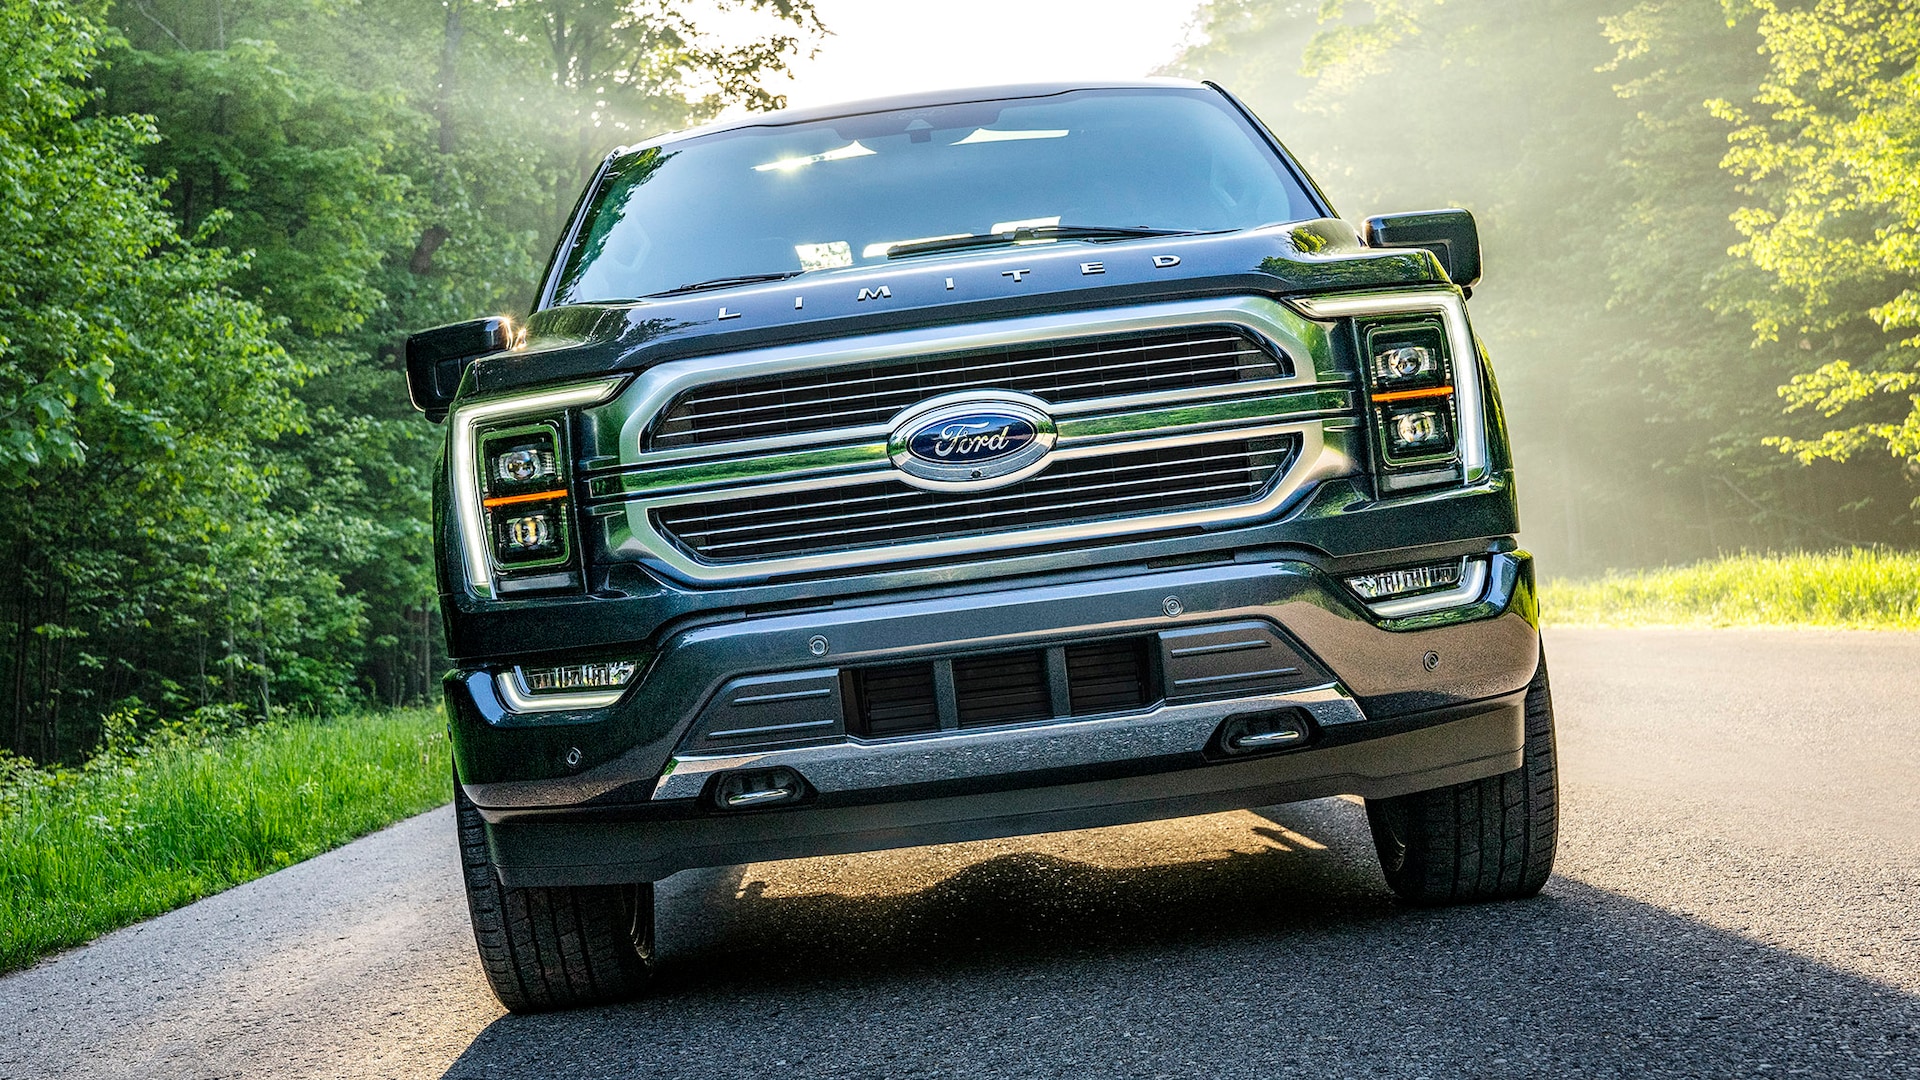 2022 Ford F-150 Prices, Reviews, and Photos - MotorTrend